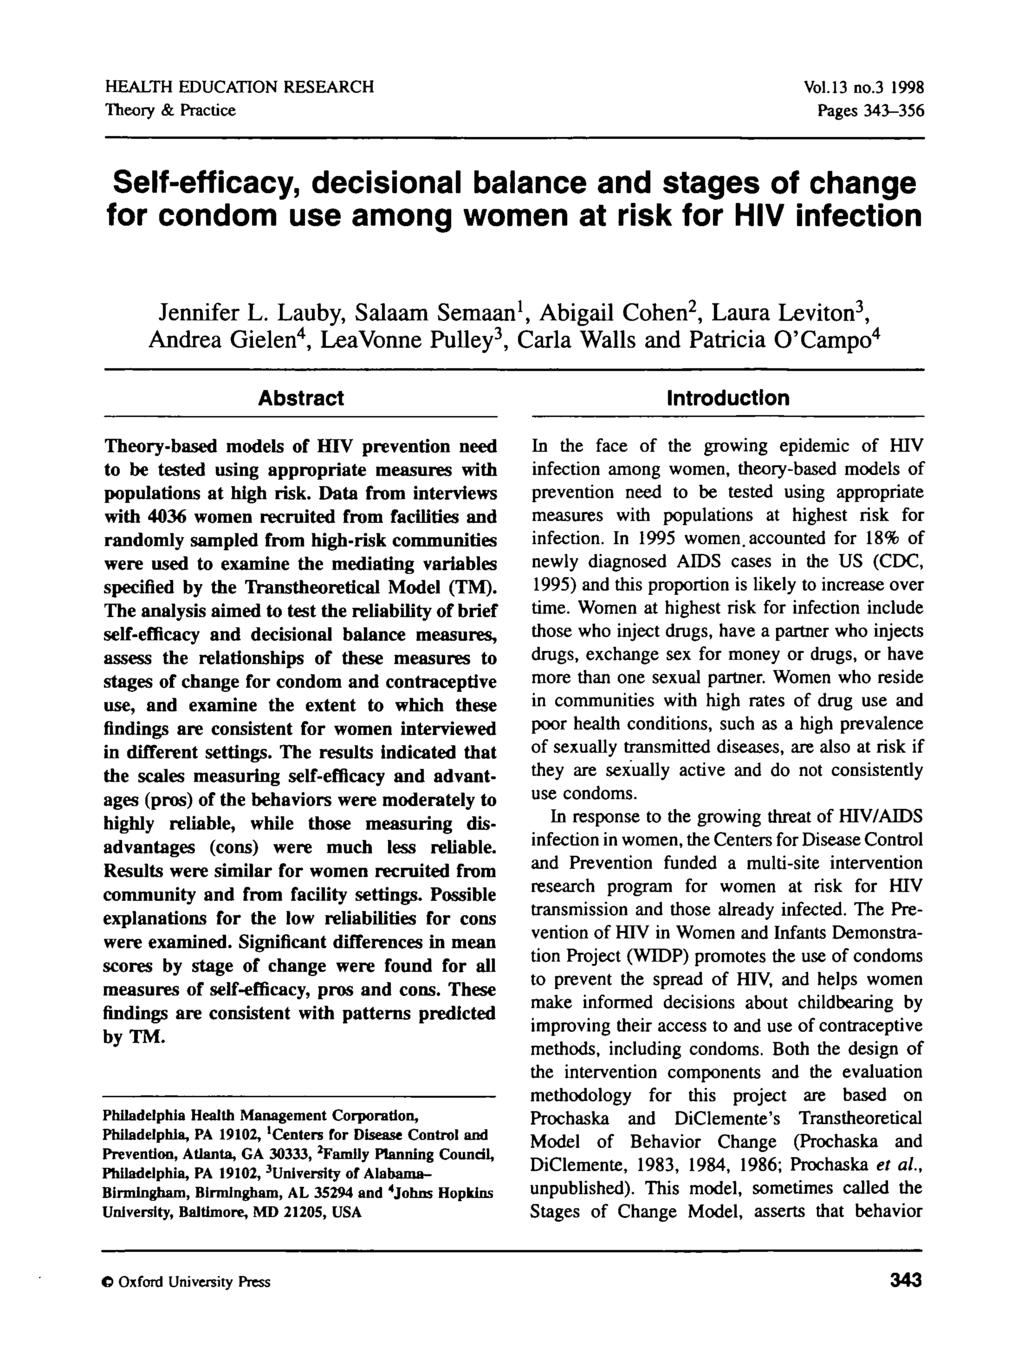 HEALTH EDUCATION RESEARCH Theory & Practice Vol.13 no.3 1998 Pages 343-356 Self-efficacy, decisional balance and stages of change for condom use among women at risk for HIV infection Jennifer L.